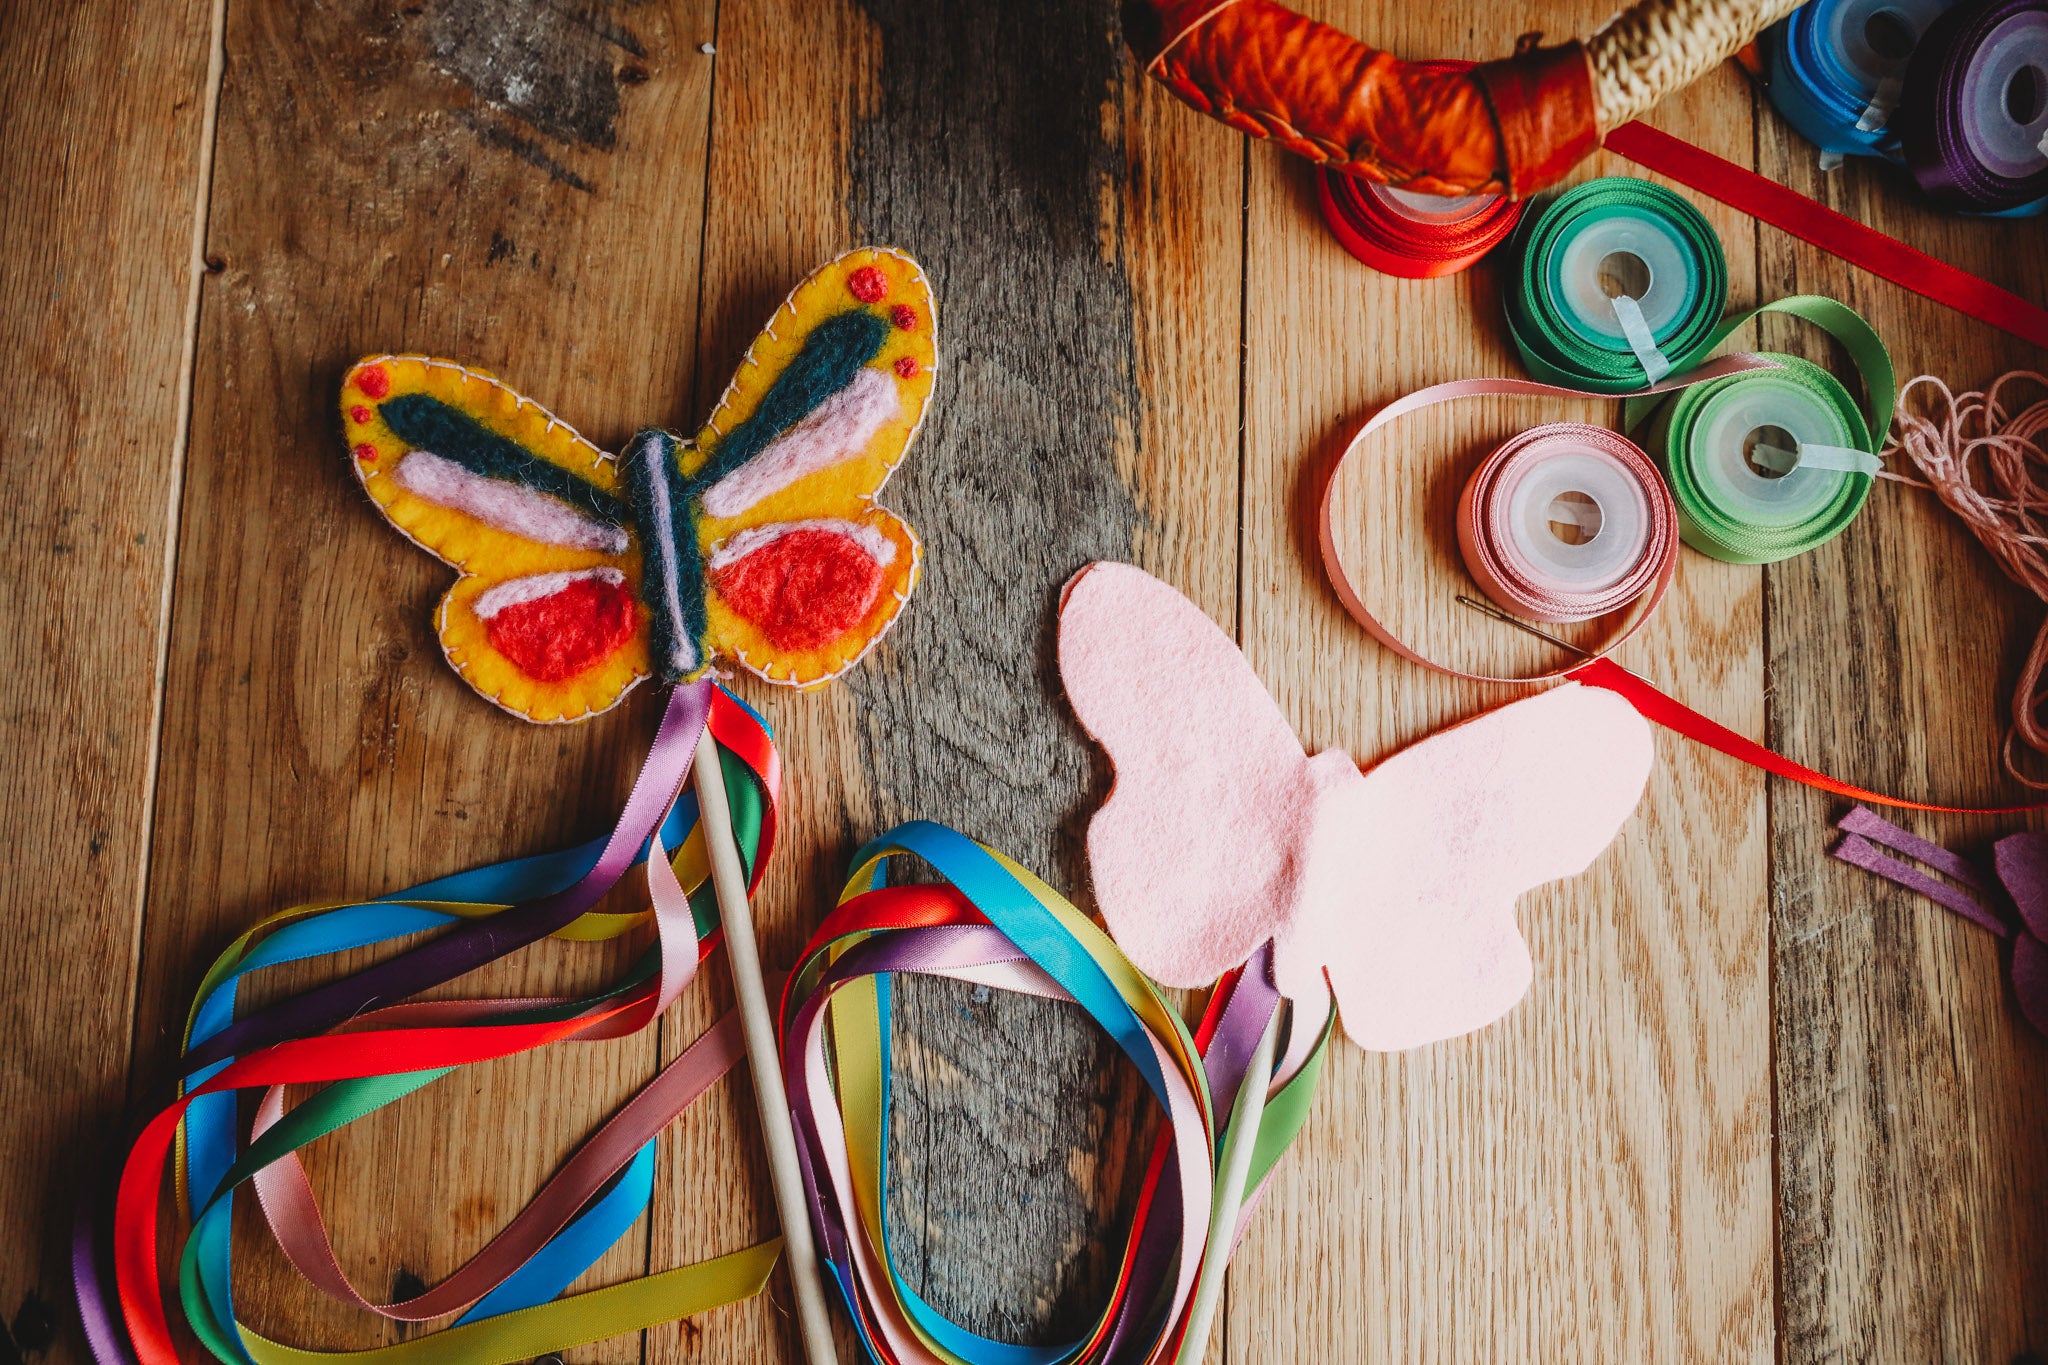 Craft A Wand To Celebrate May Day